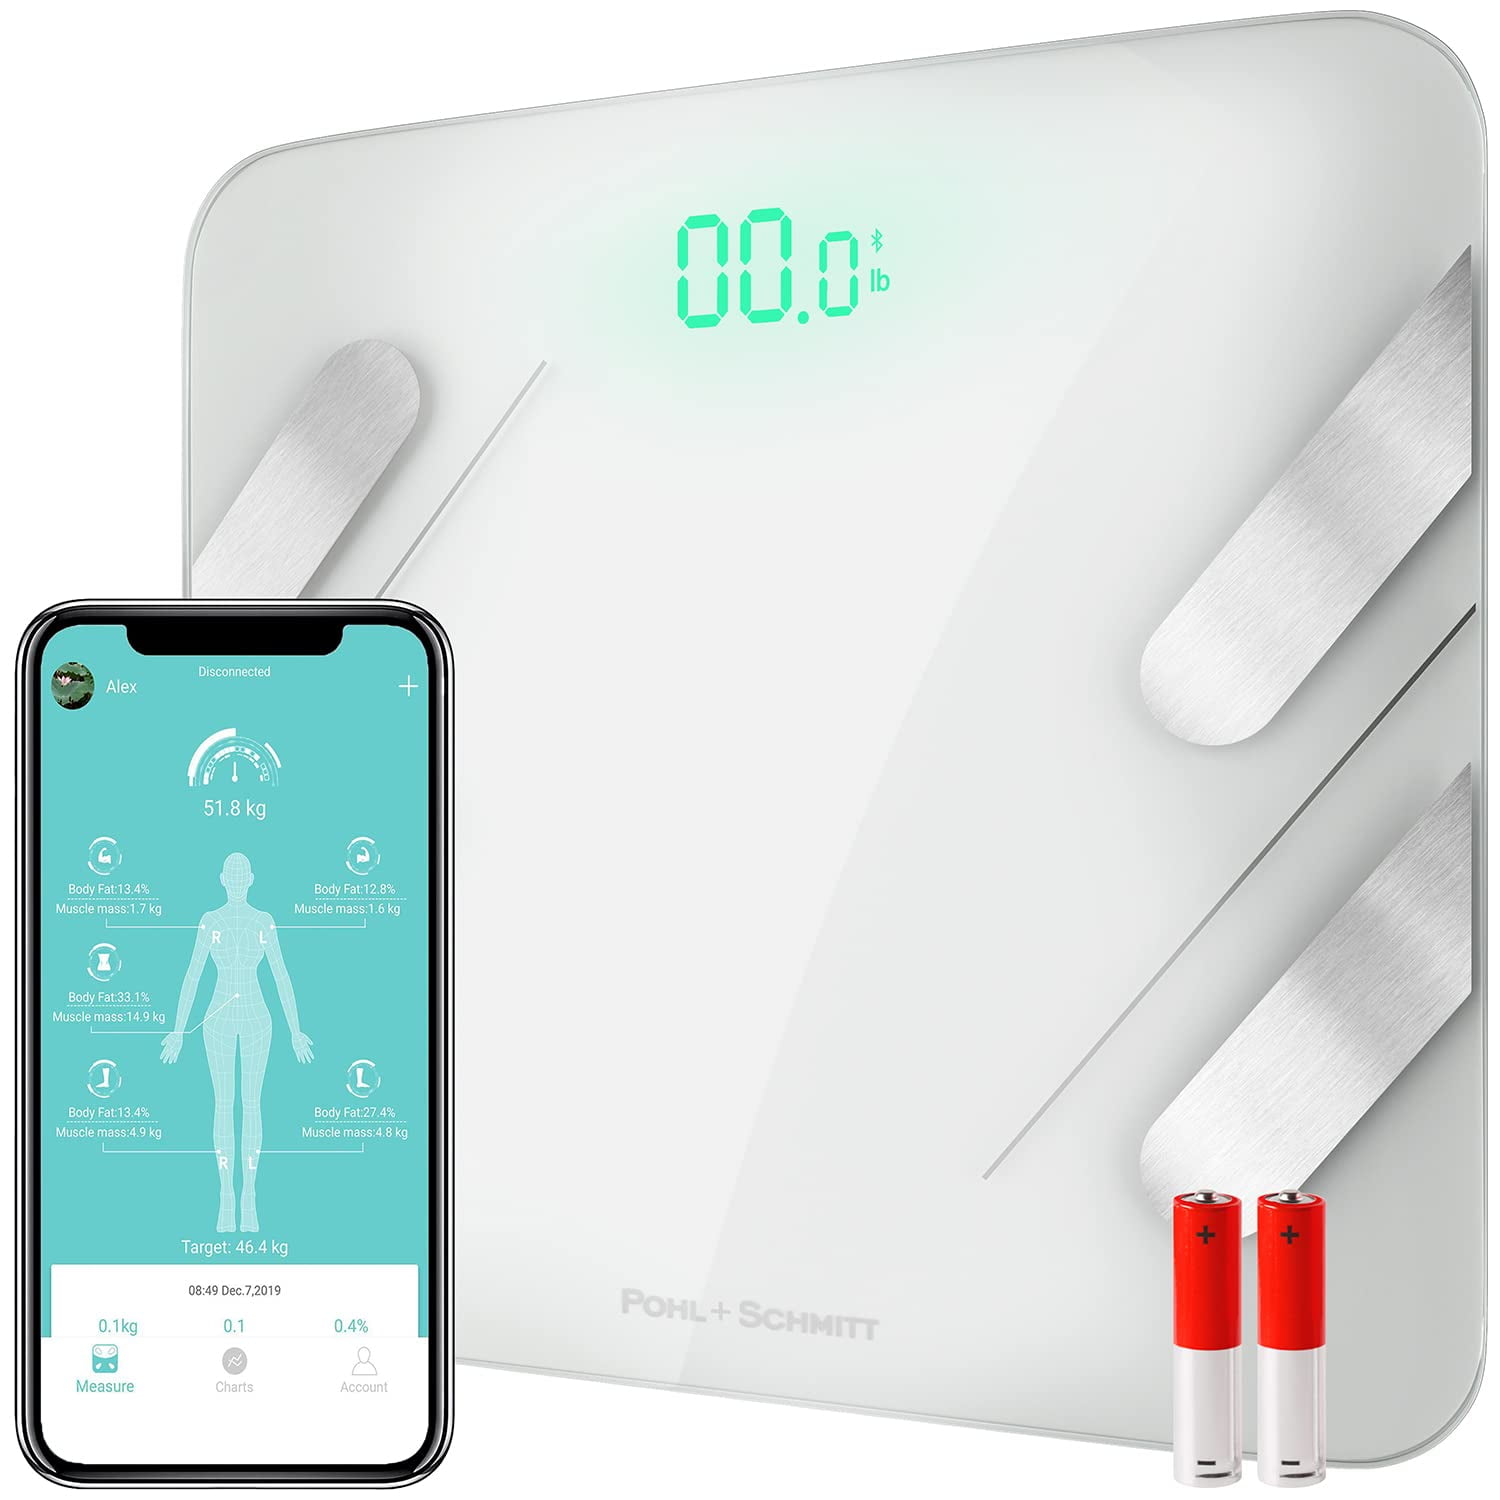 Smart Fitness Bathroom Scale (Weight and Body Fat Scale) – Pur-Well Living